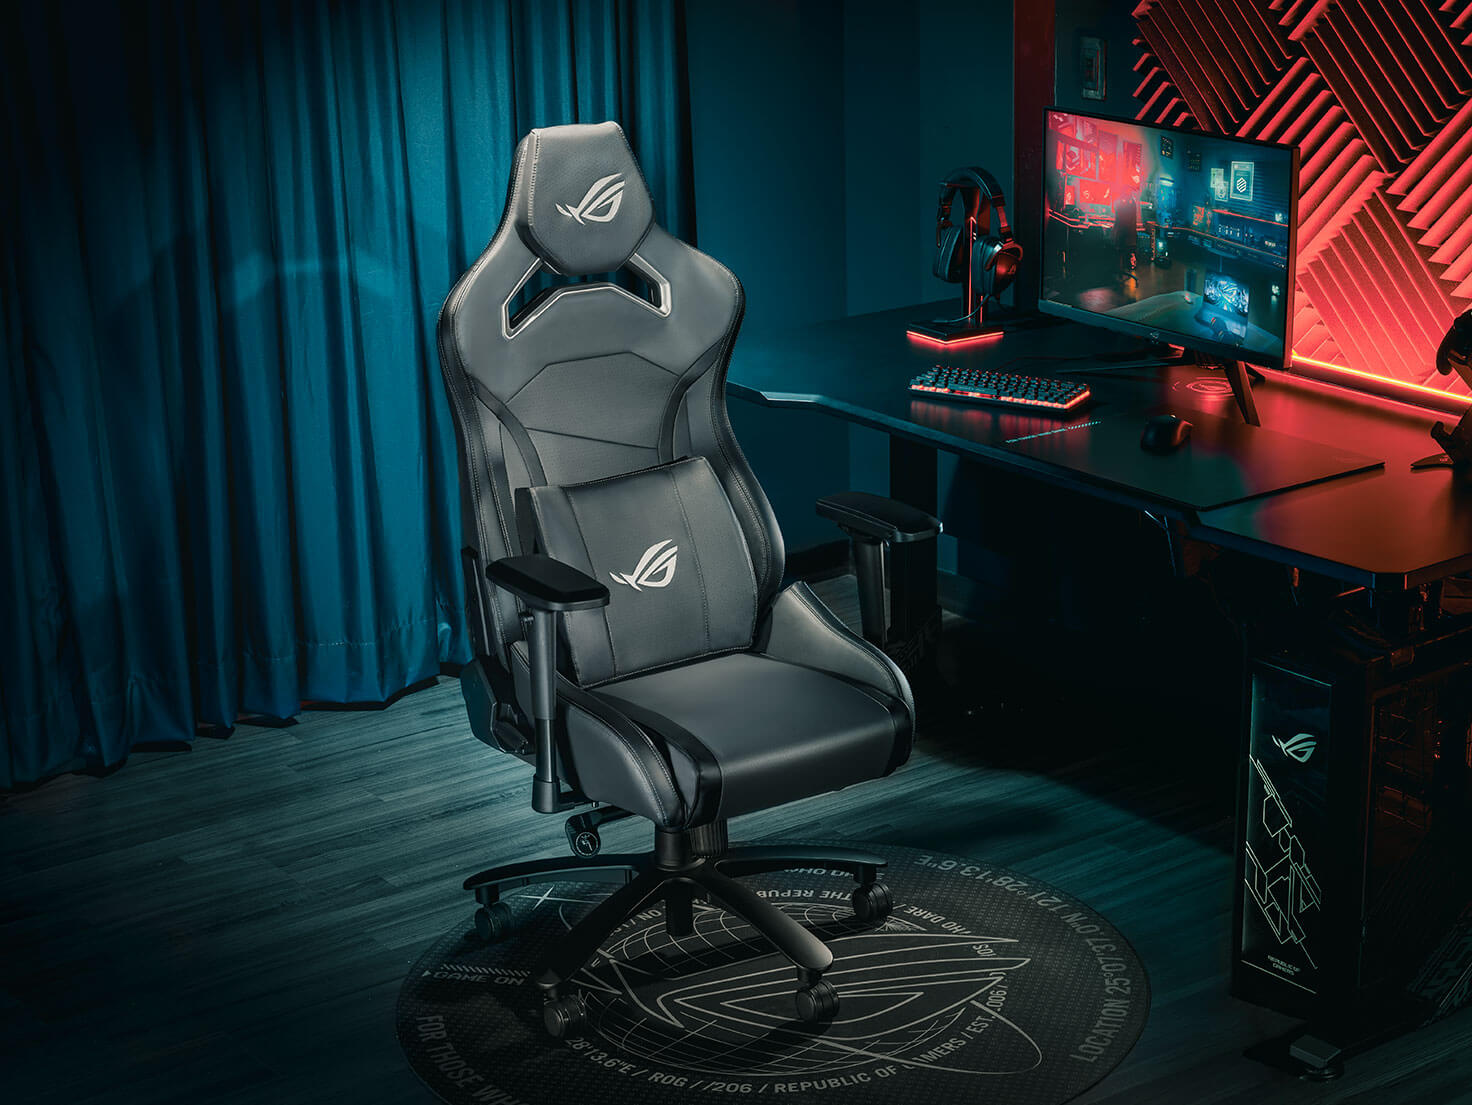 ROG Chariot X gaming chair front view to the right in a gaming room setting